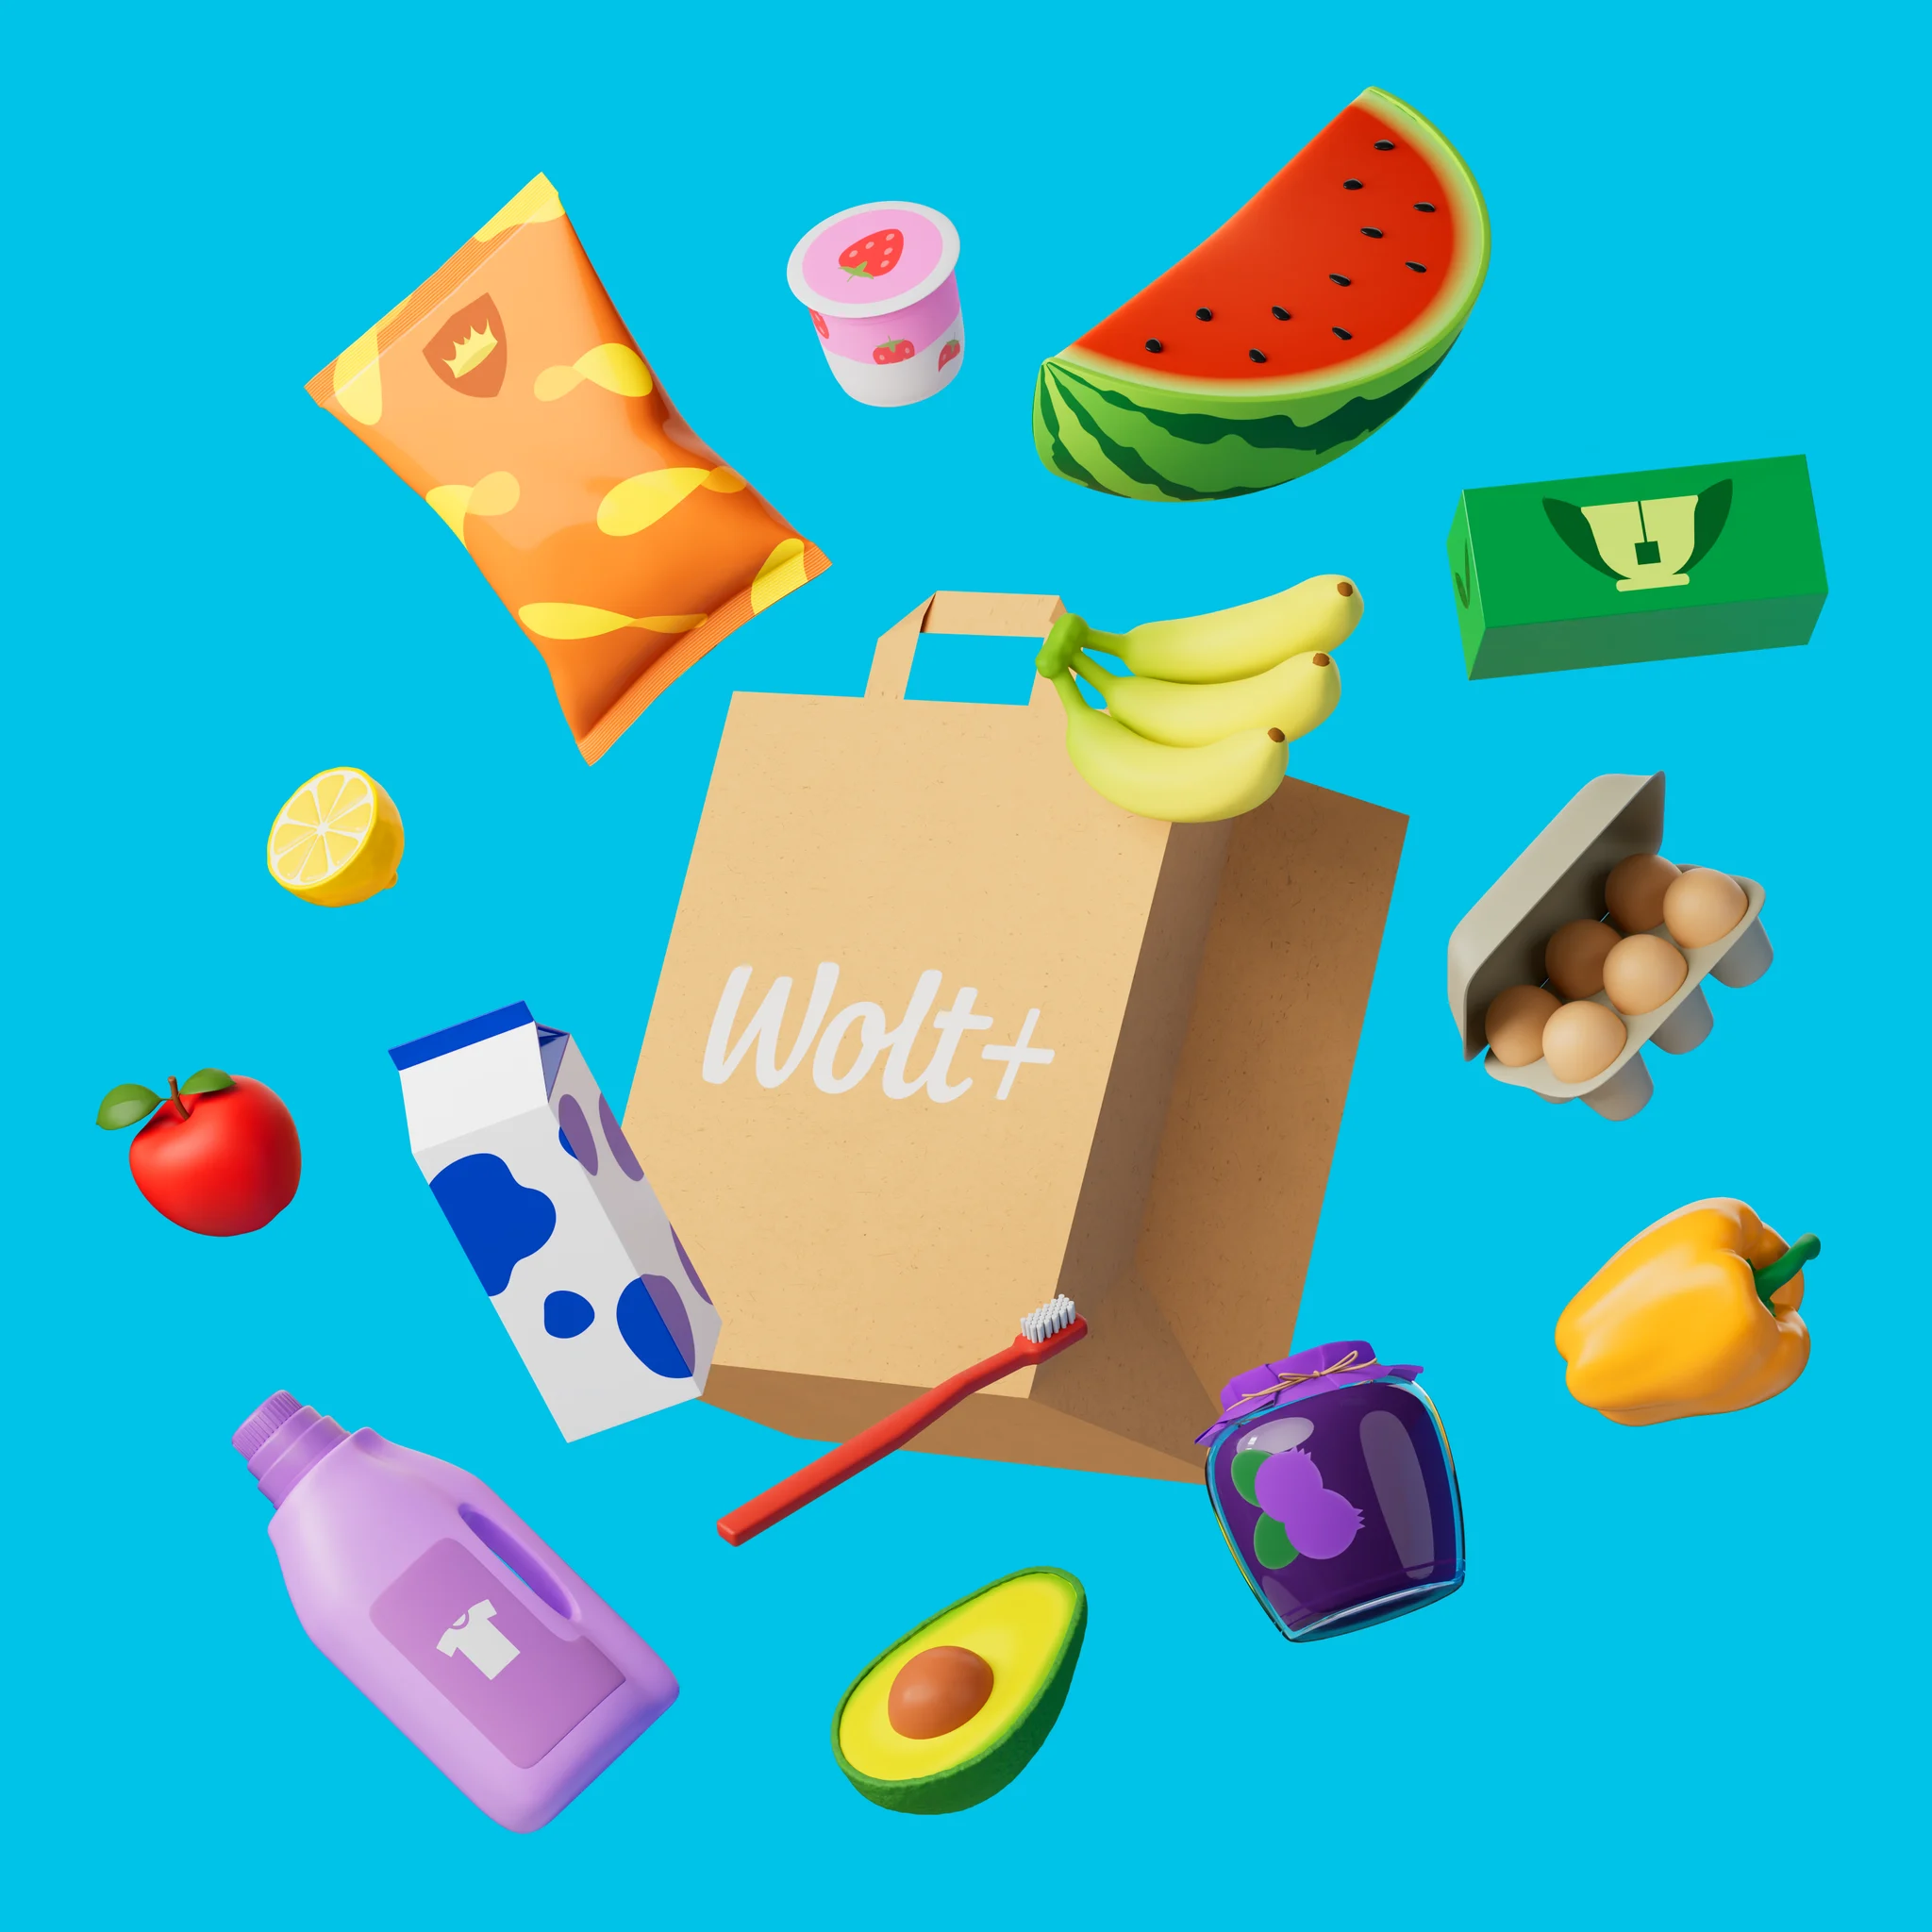 Shop Groceries and more with Wolt